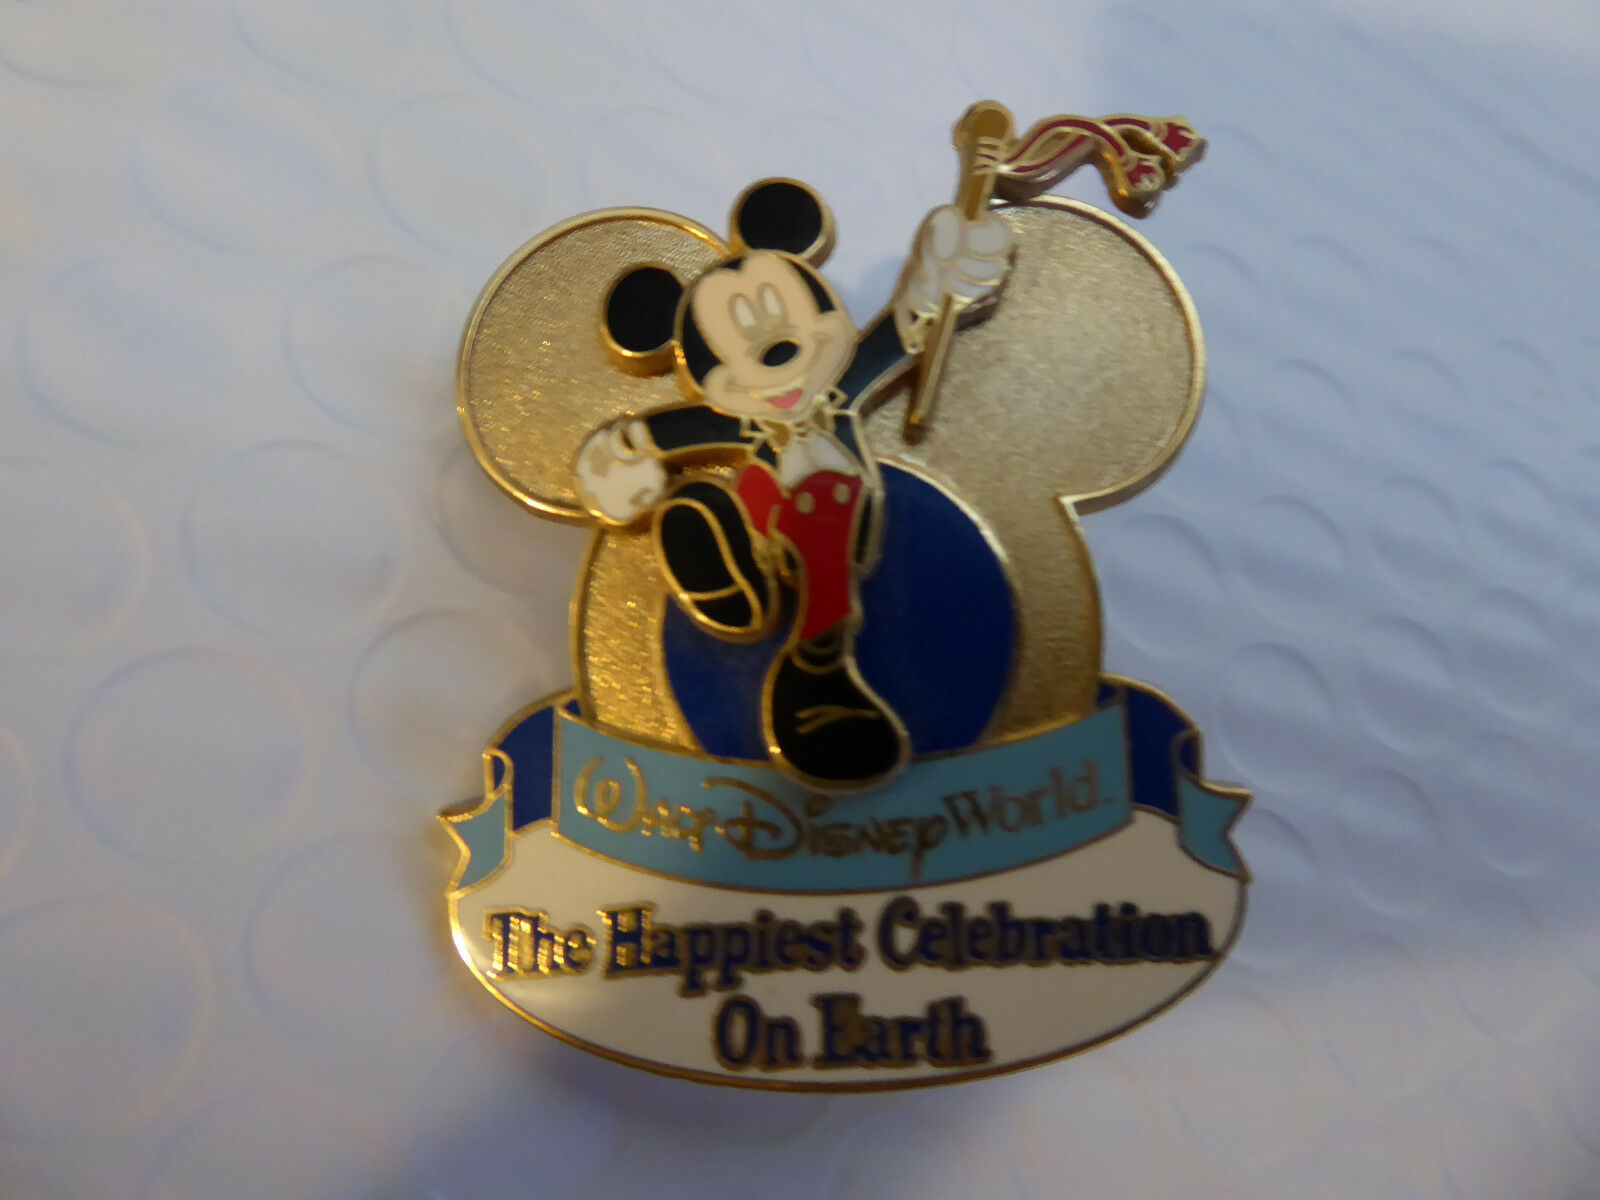 Disney Trading Broches 41007 Happiest Célébration Sur Terre (Mickey Mouse) - £7.61 GBP